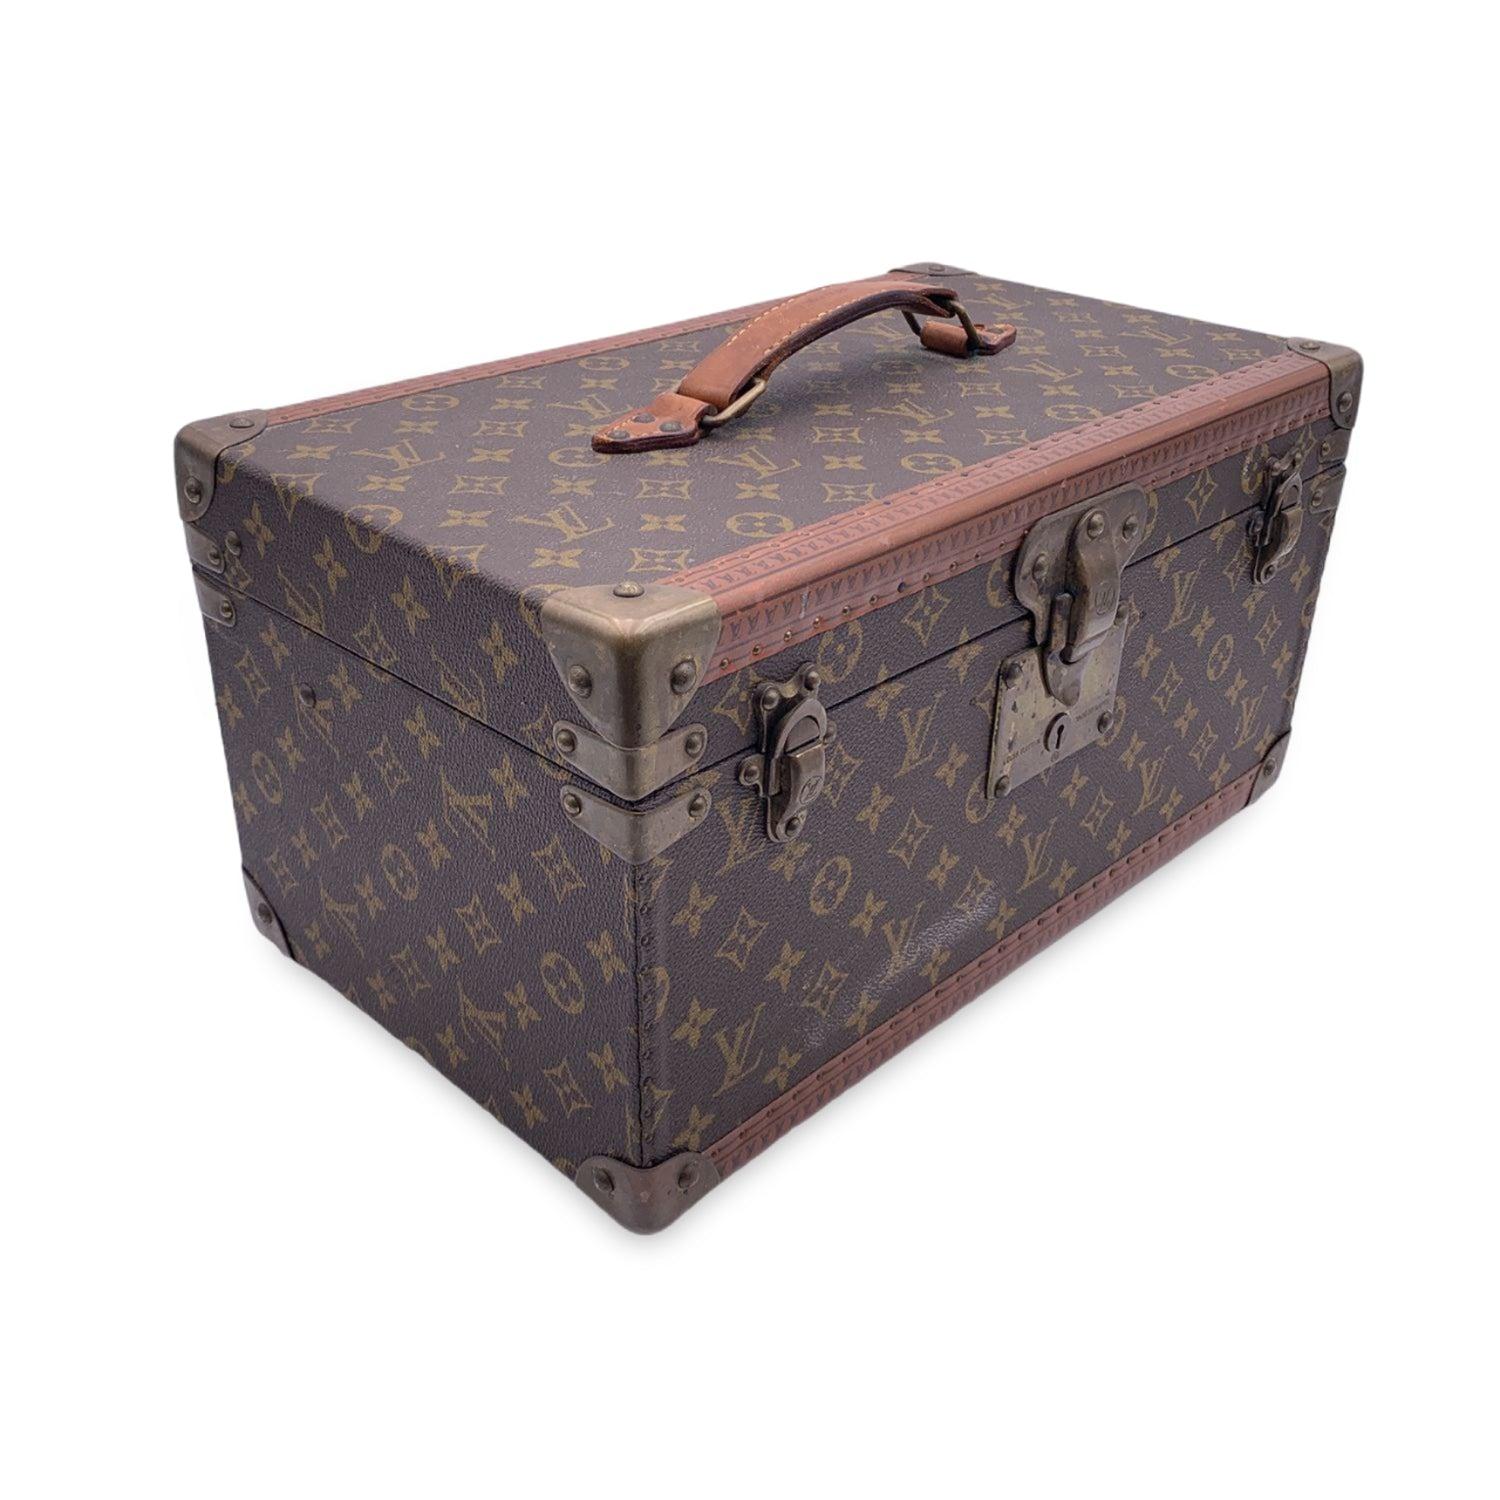 Splendid Louis Vuitton monogram 'Boite Bouteille et Glace' (also called 'Bottle and Ice box') cosmetic travel trunk/case, mod. M21822. This is a limited edition from the 70's.The peculiarity of this limited edition is that the leather trim with the